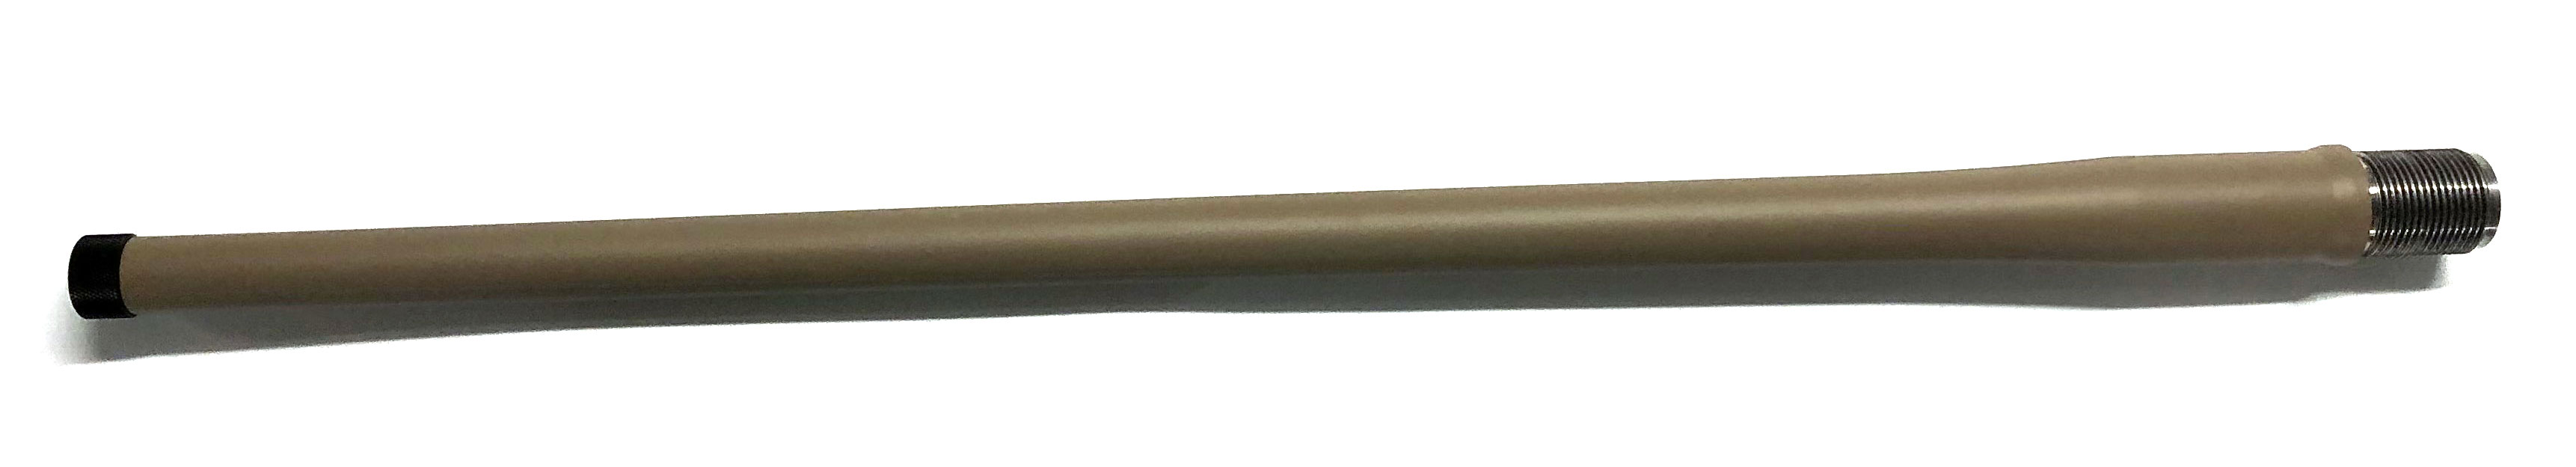 Walther barrel 6.5x47 lapua screw fit for AI AXMC Pale Brown, 24", Threaded, 1:8 twist|